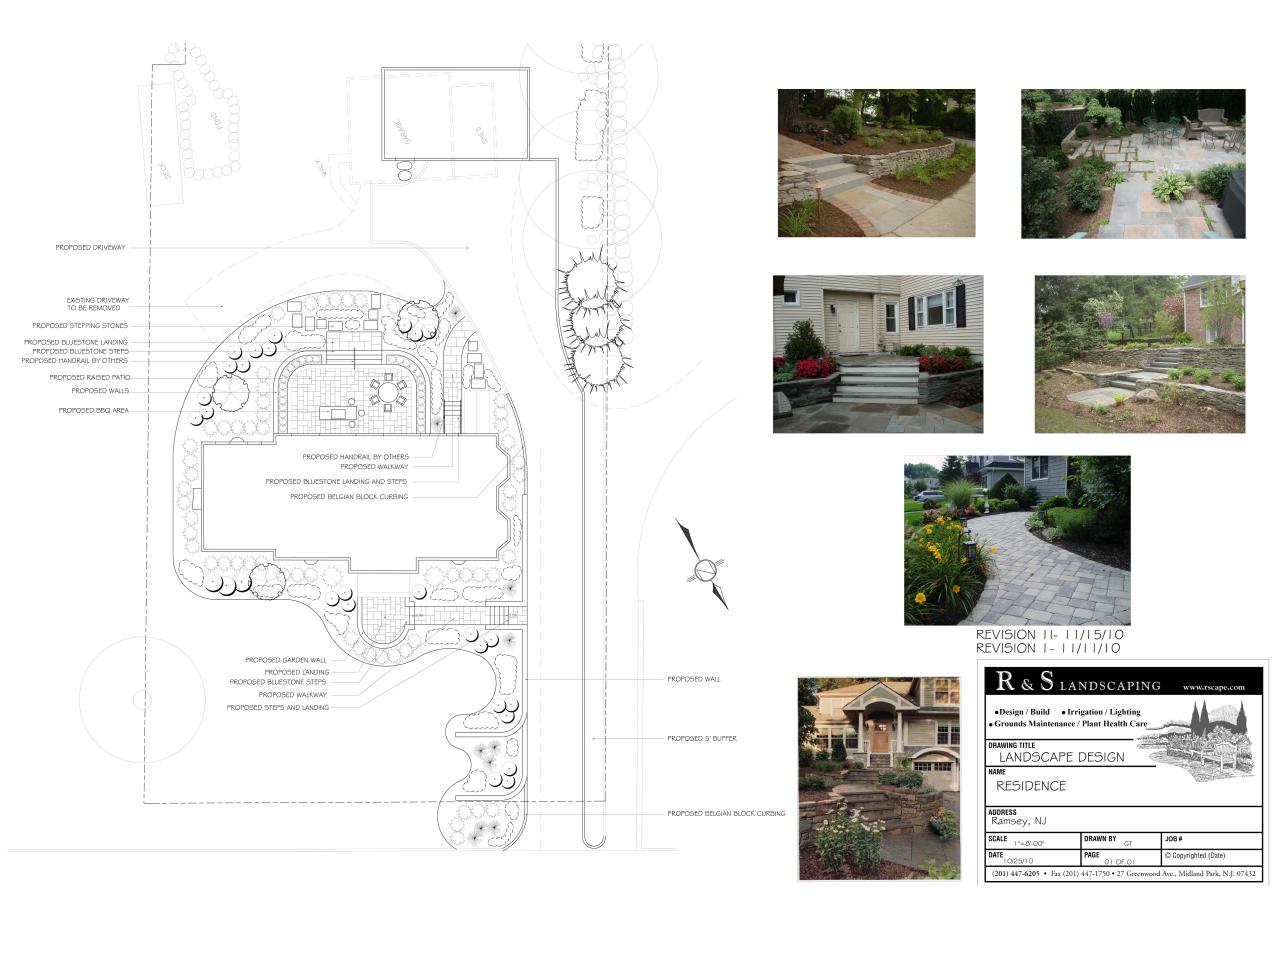 How To Plan A Landscape Design, A And S Landscaping